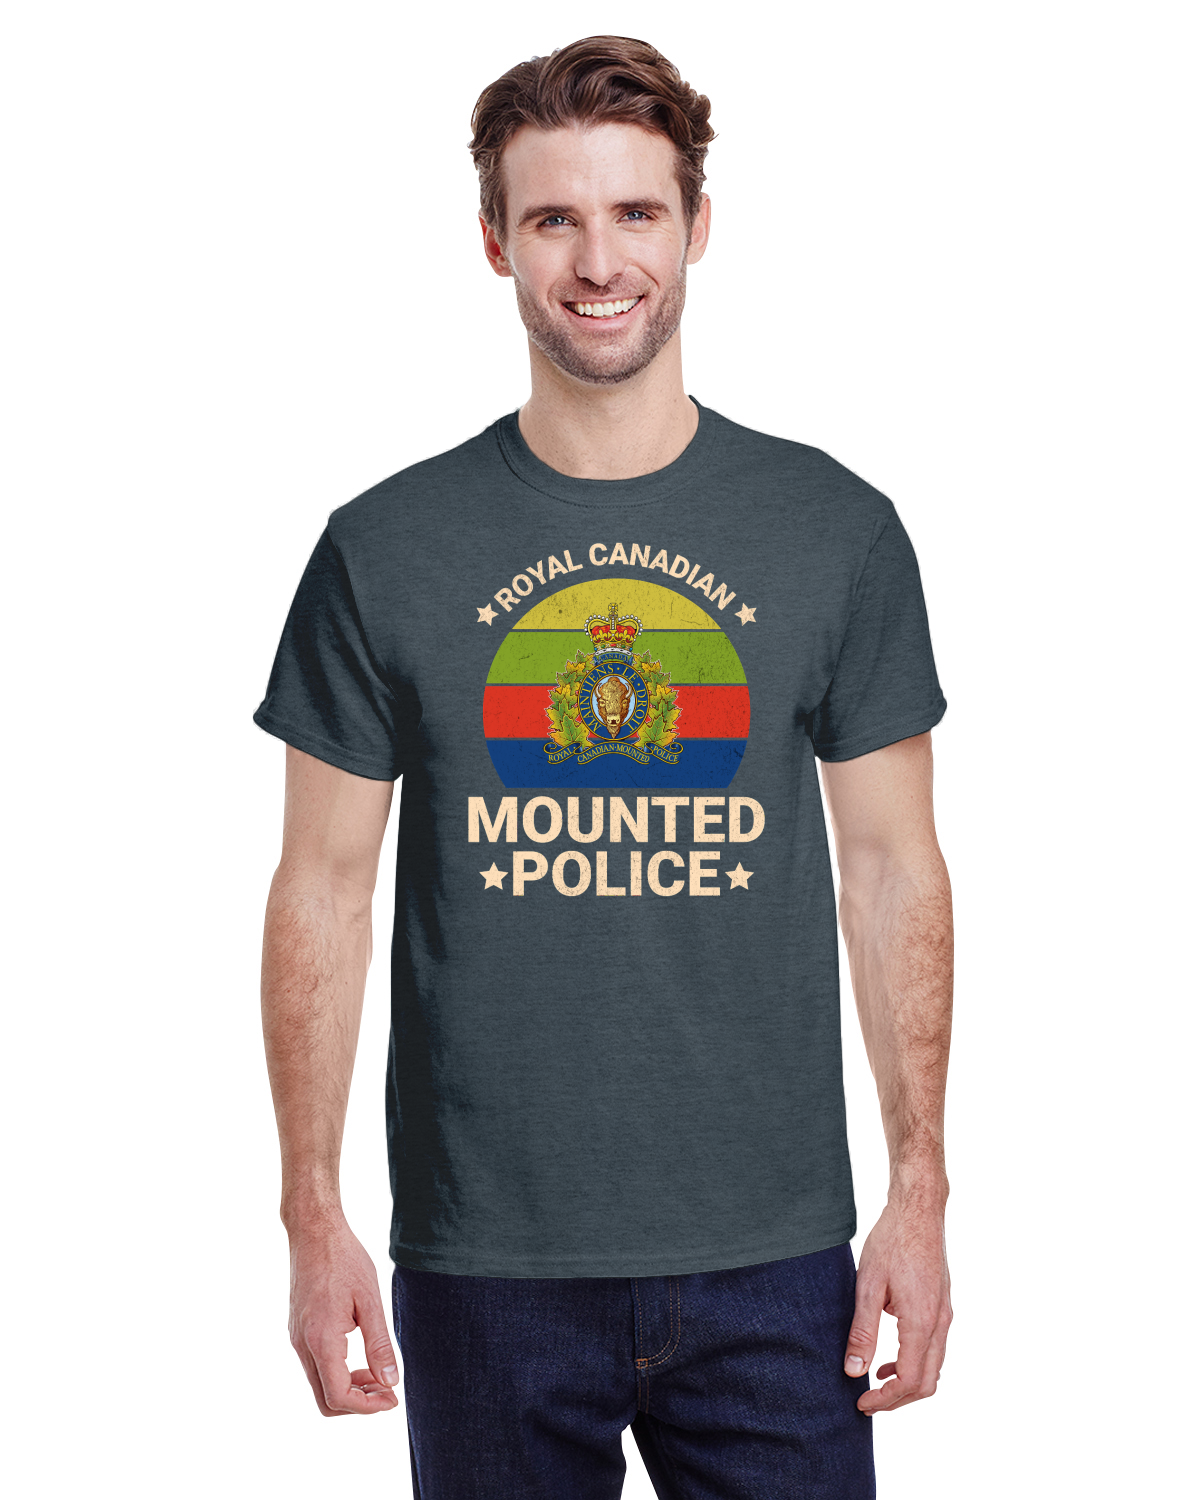 RCMP Men's T-Shirt, Royal Canadian Mounted Police Featuring Official Crest